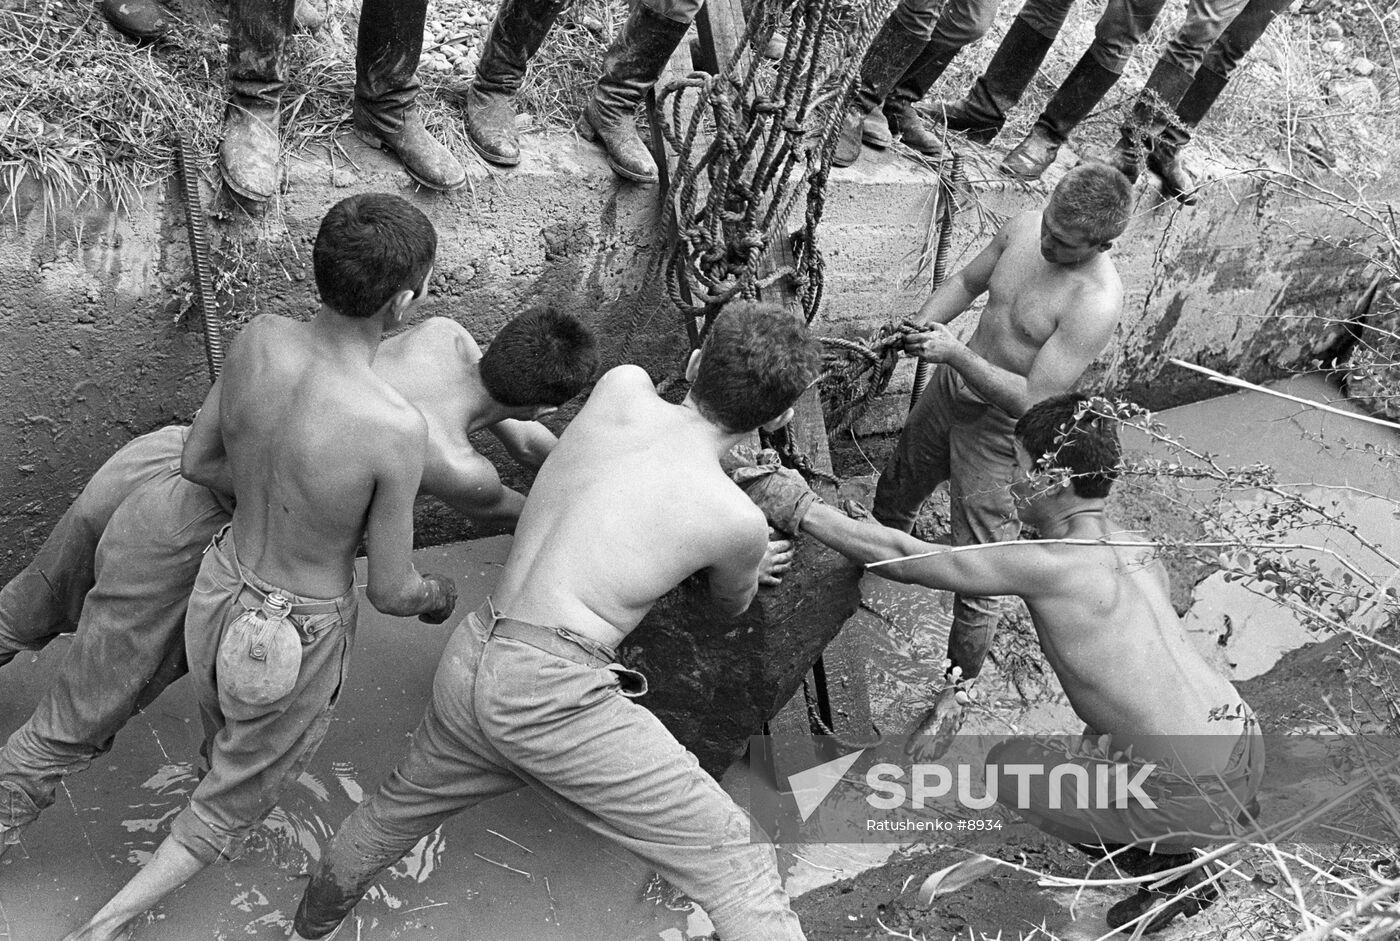 SOLDIERS IRRIGATION CANAL ETHNIC CONFLICT 